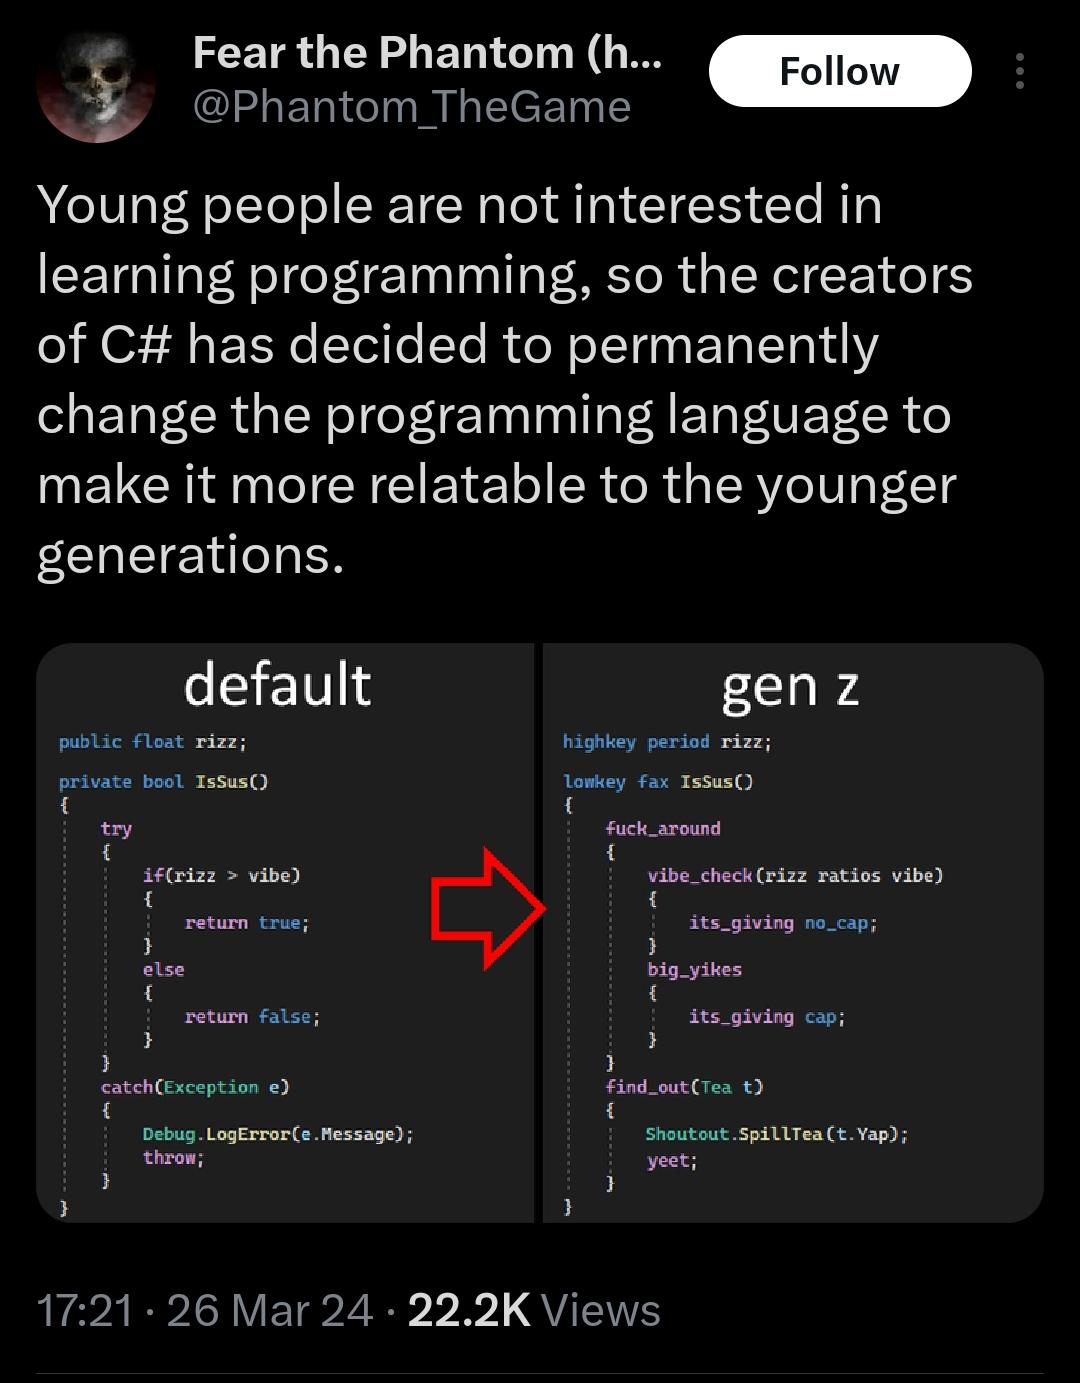 Young people are not interested in learning programming